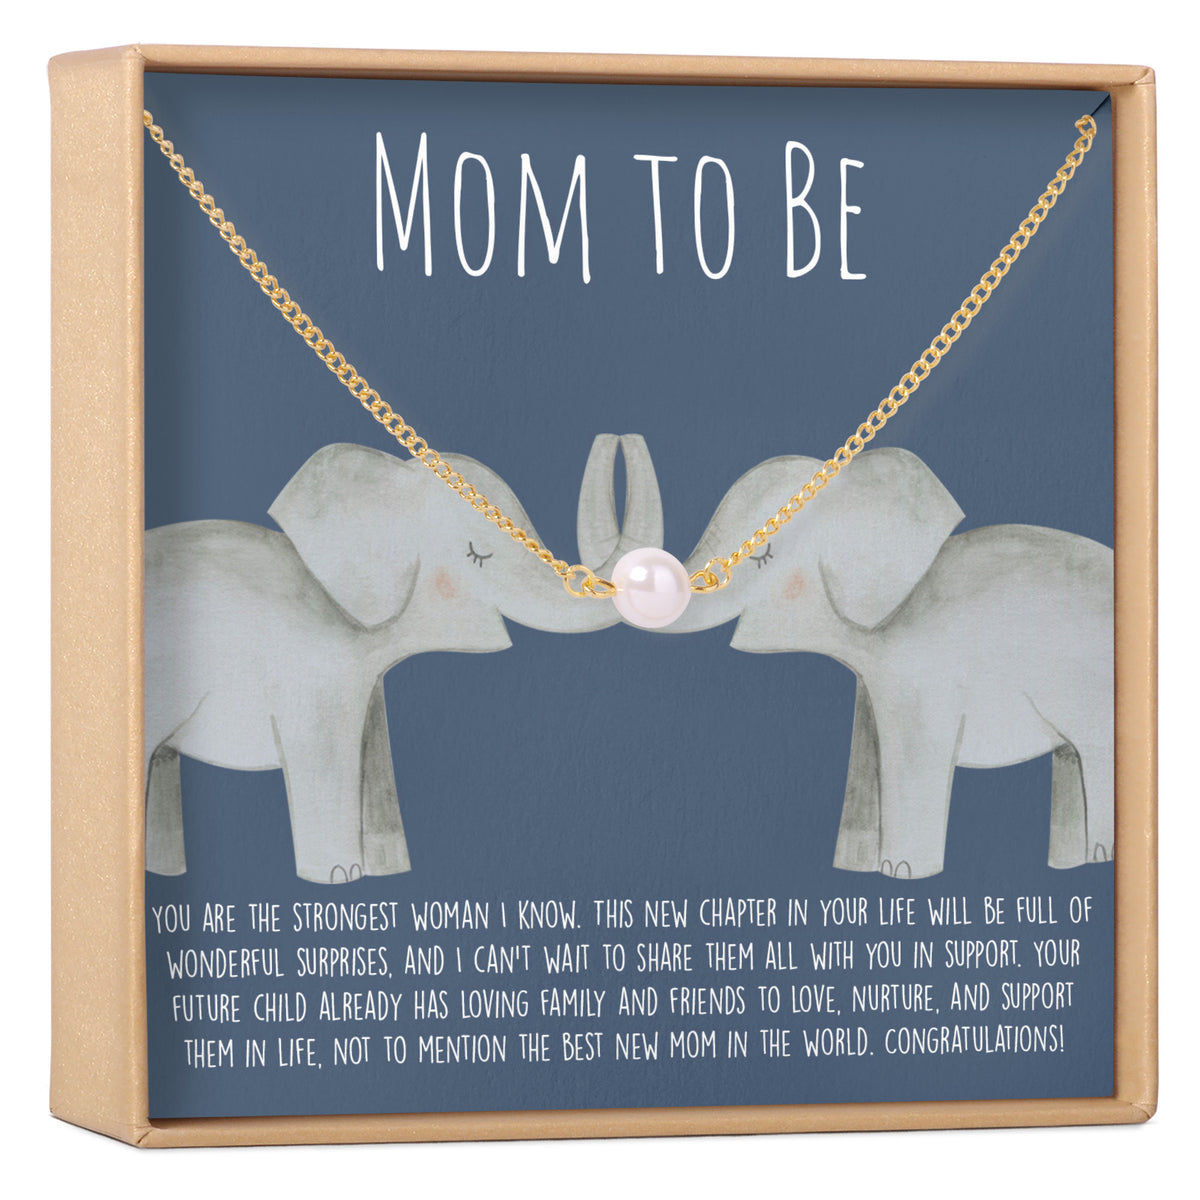 New or Expecting Mom? 7 Great gifts to get her – Bao Bei Body